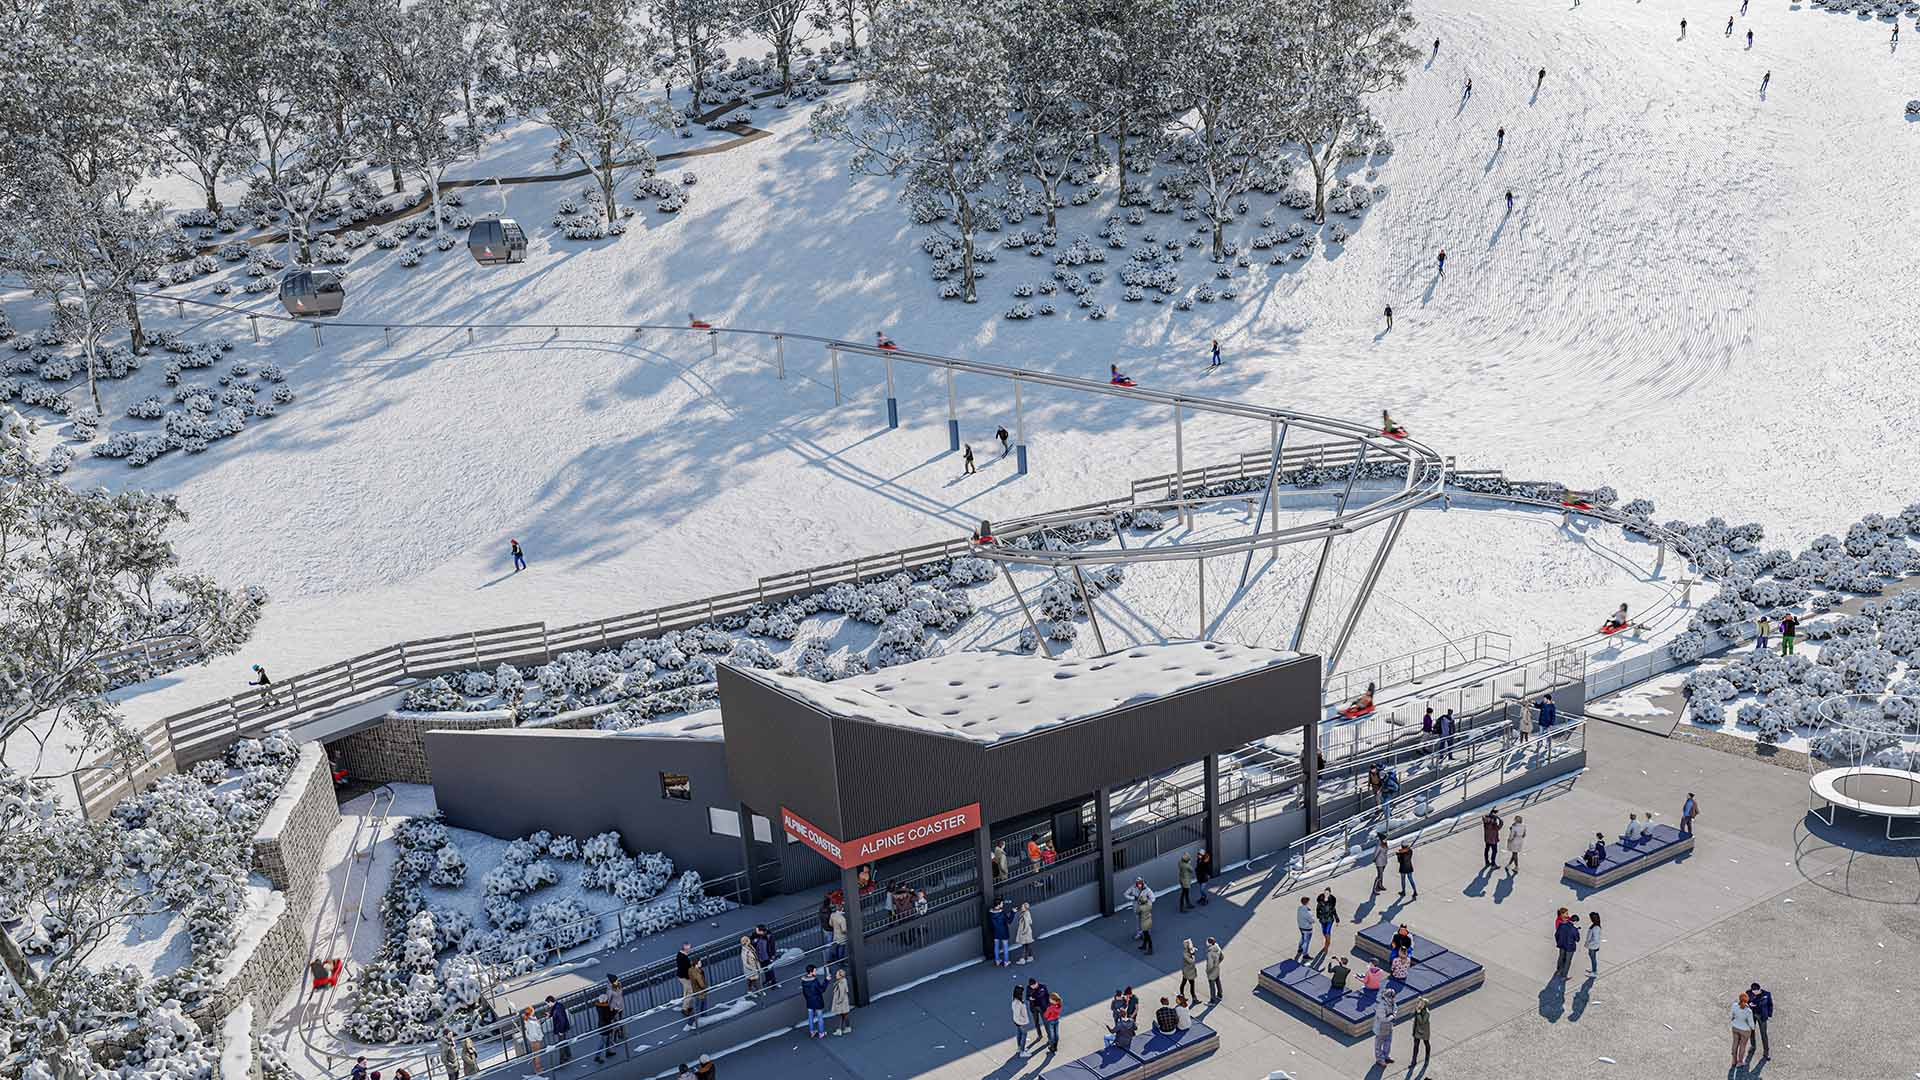 Background image for Coming Soon: Thredbo Is About to Become Home to the First Alpine Coaster in the Southern Hemisphere